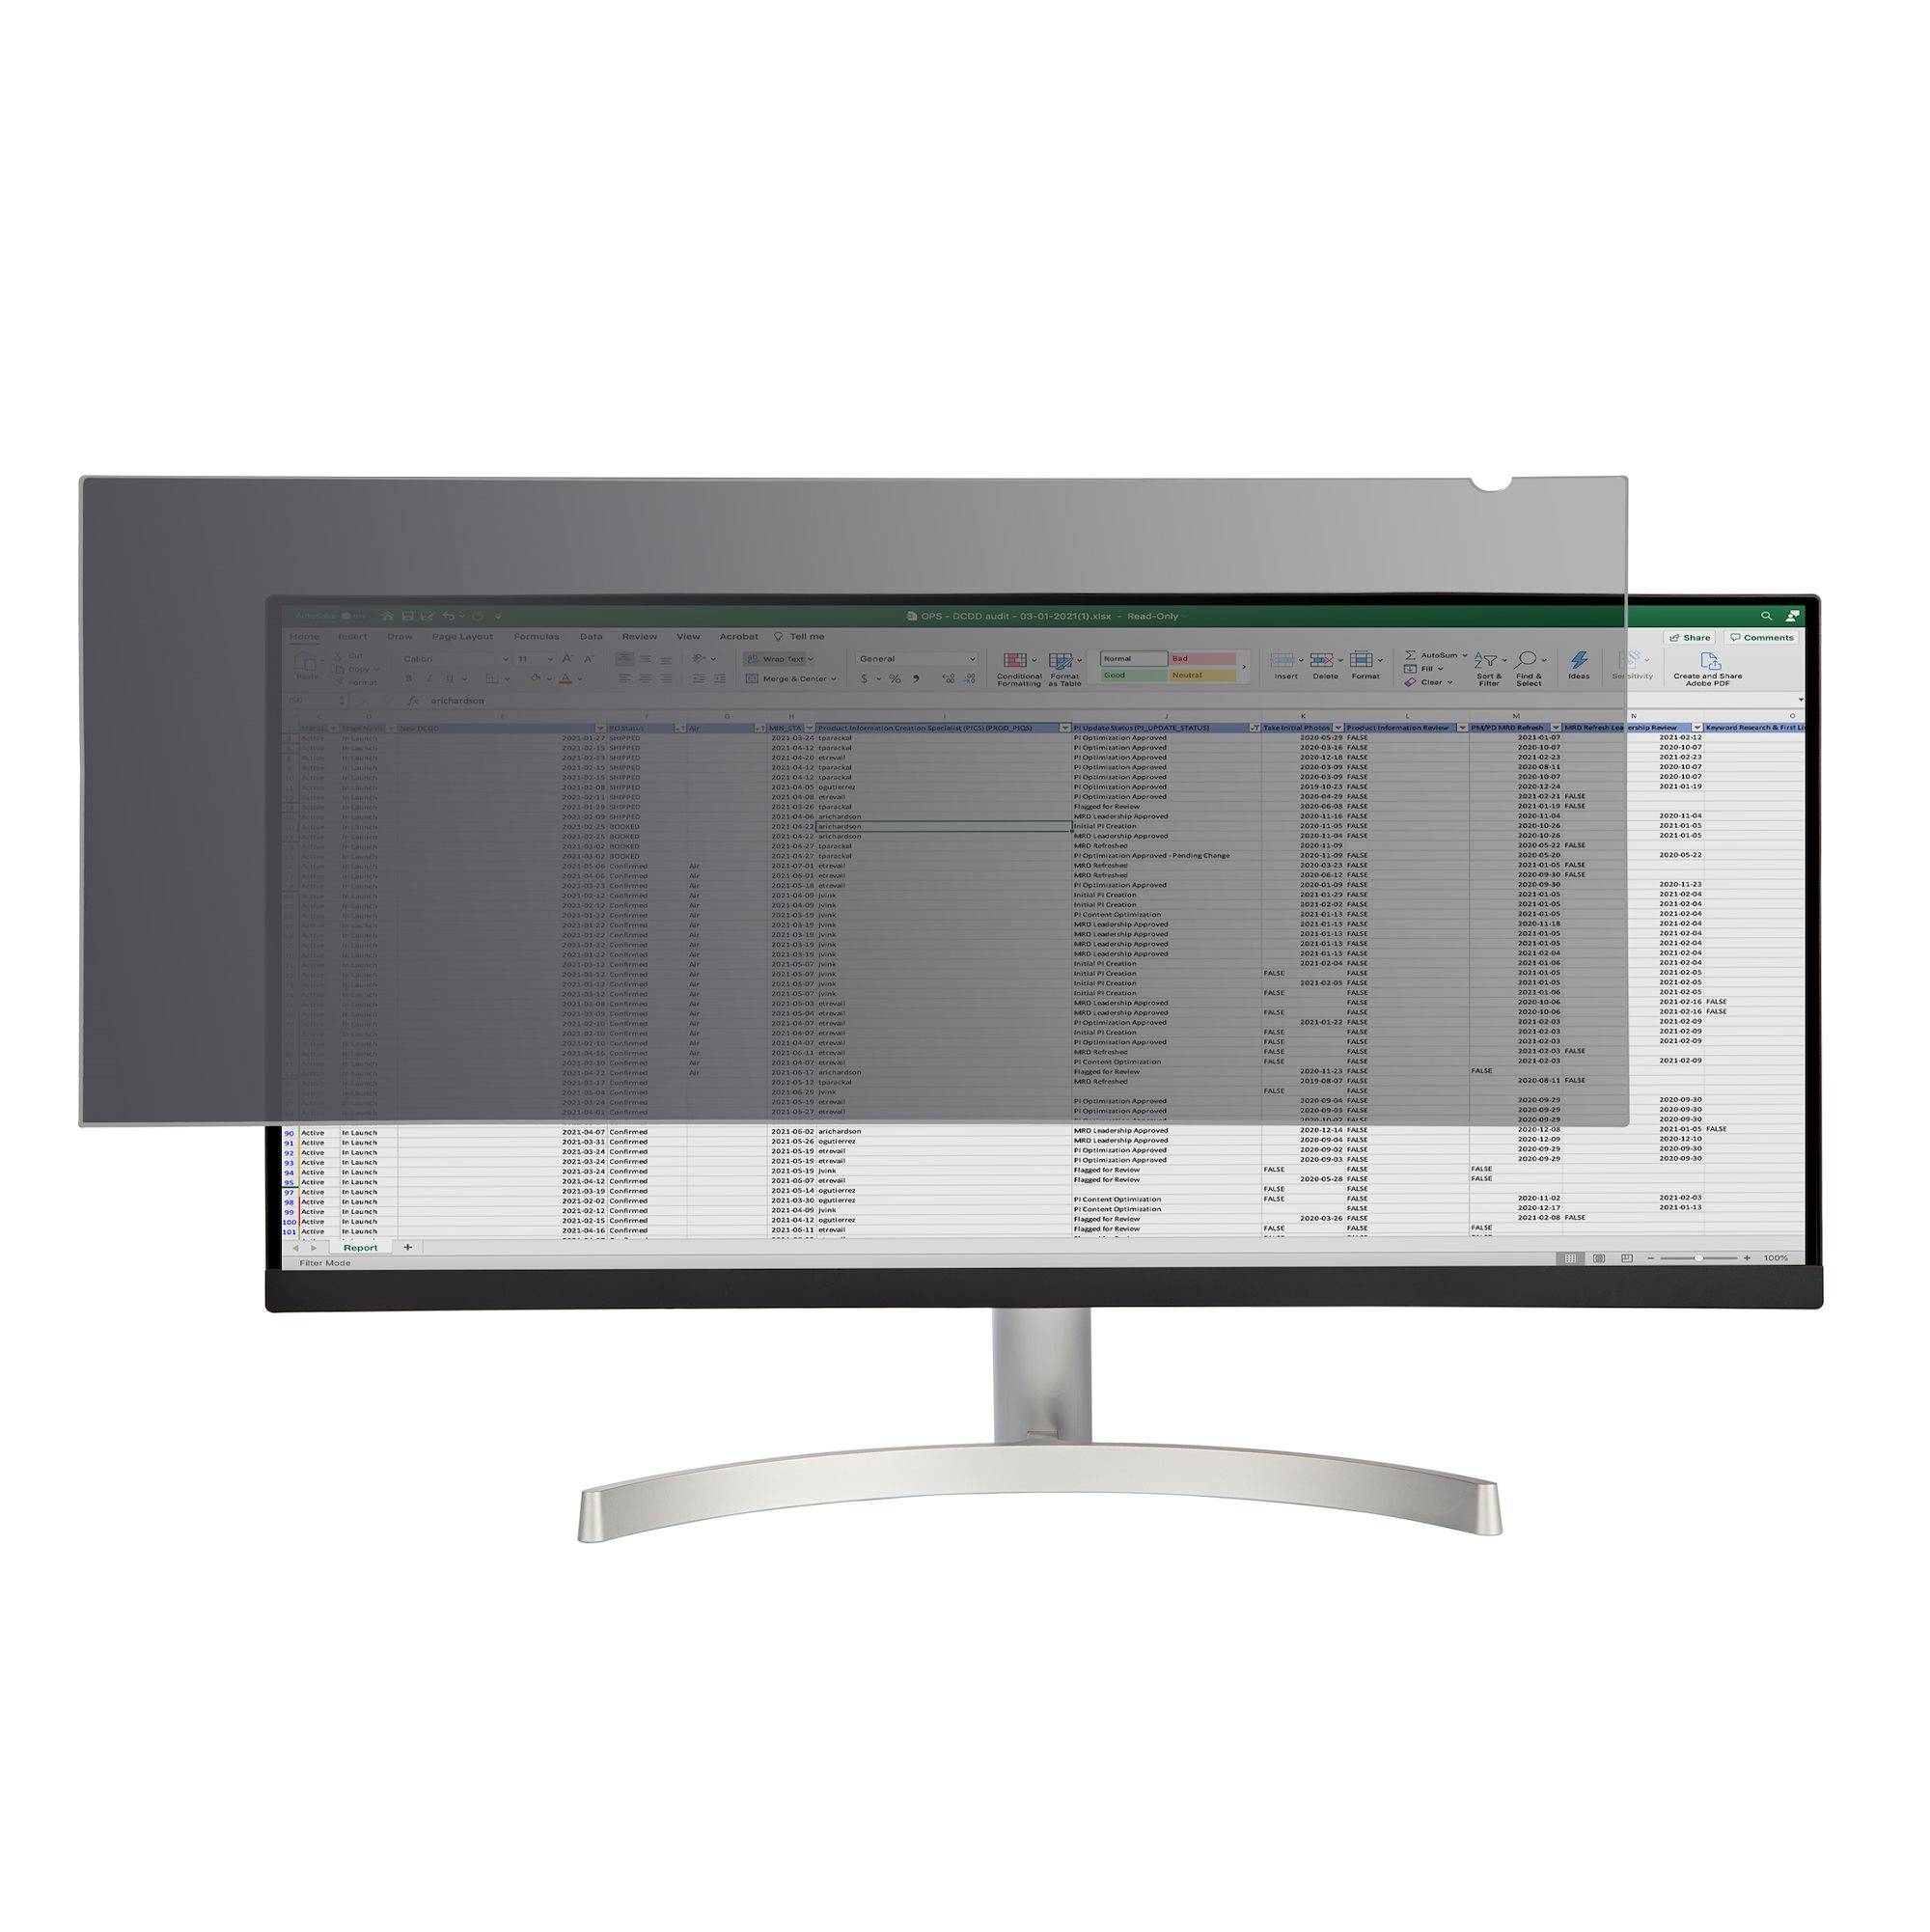 Rca Informatique - image du produit : 34IN. MONITOR PRIVACY SCREEN - UNIVERSAL - MATTE OR GLOSSY